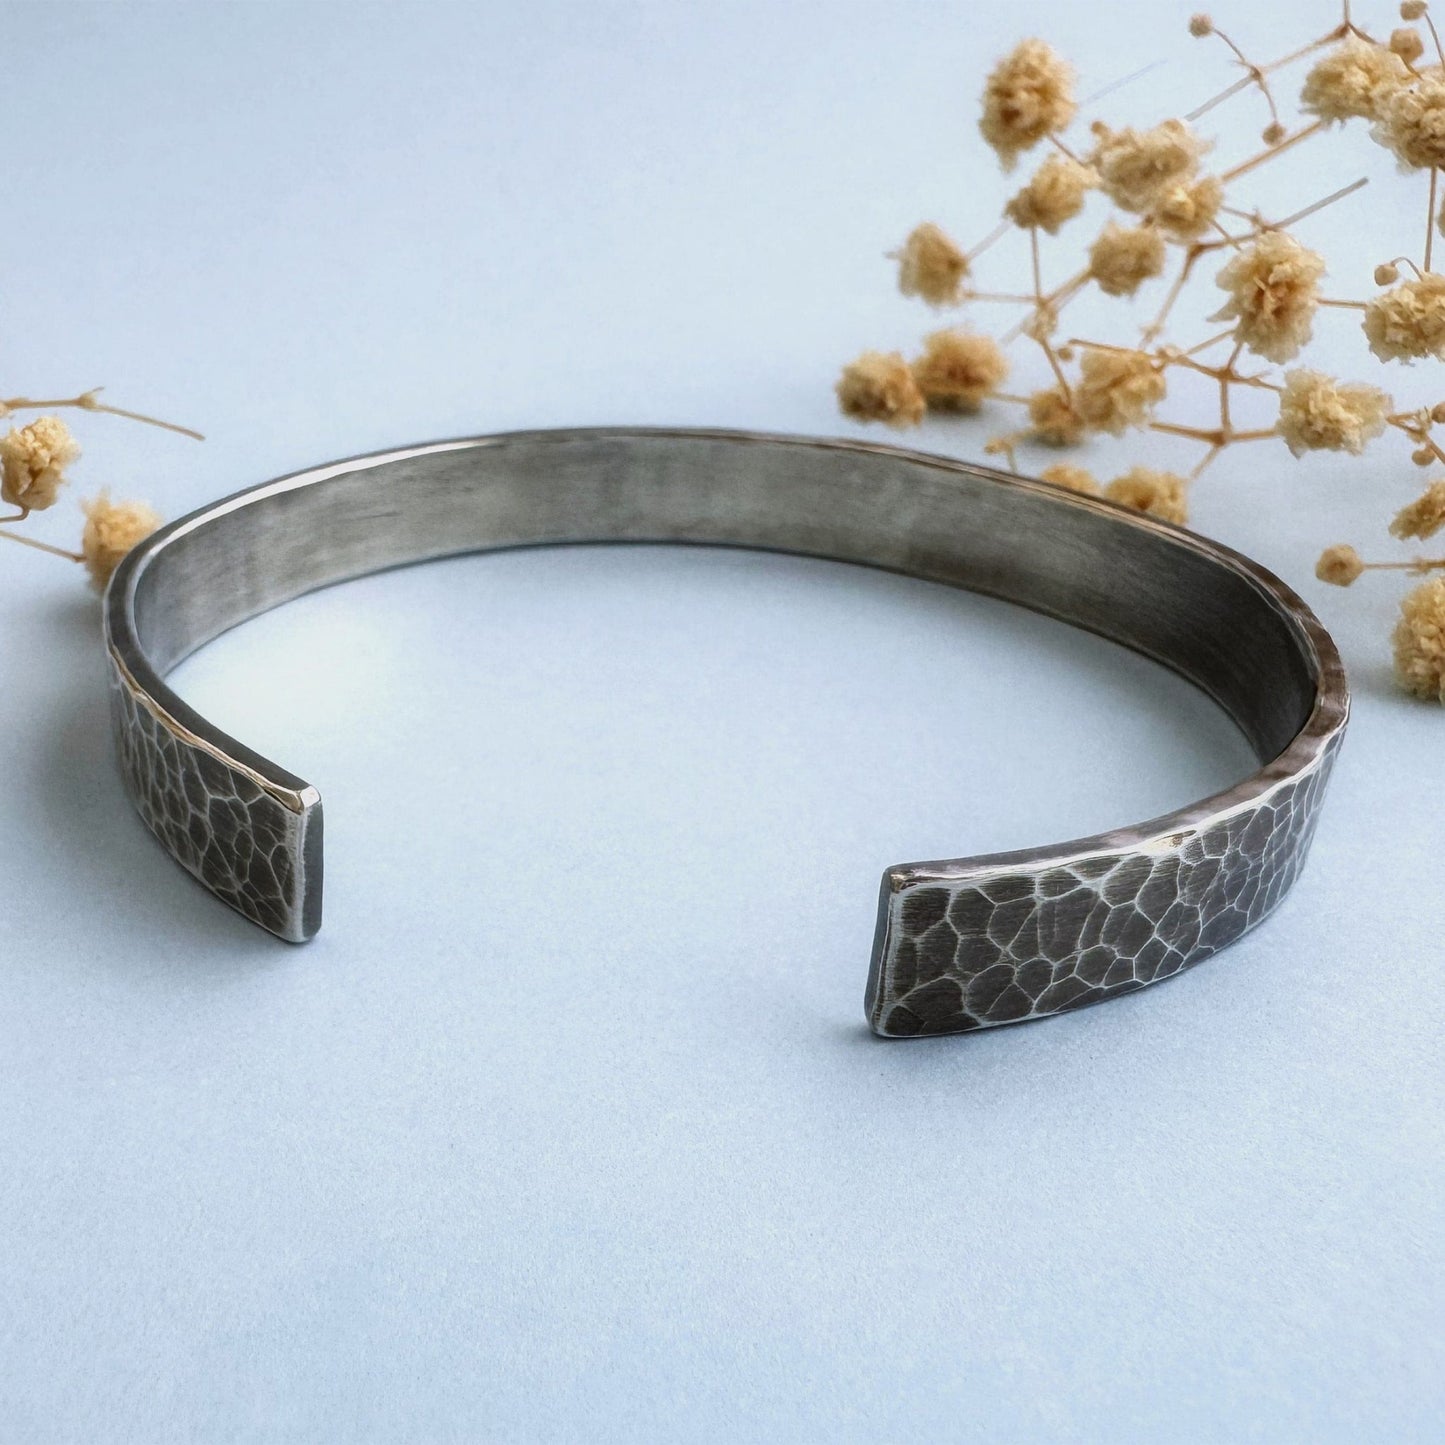 A heavy, hammered/beaten sterling silver cuff bracelet with a blackened finish is lying on a pale blue background. There are cream coloured dried flowers behind it.